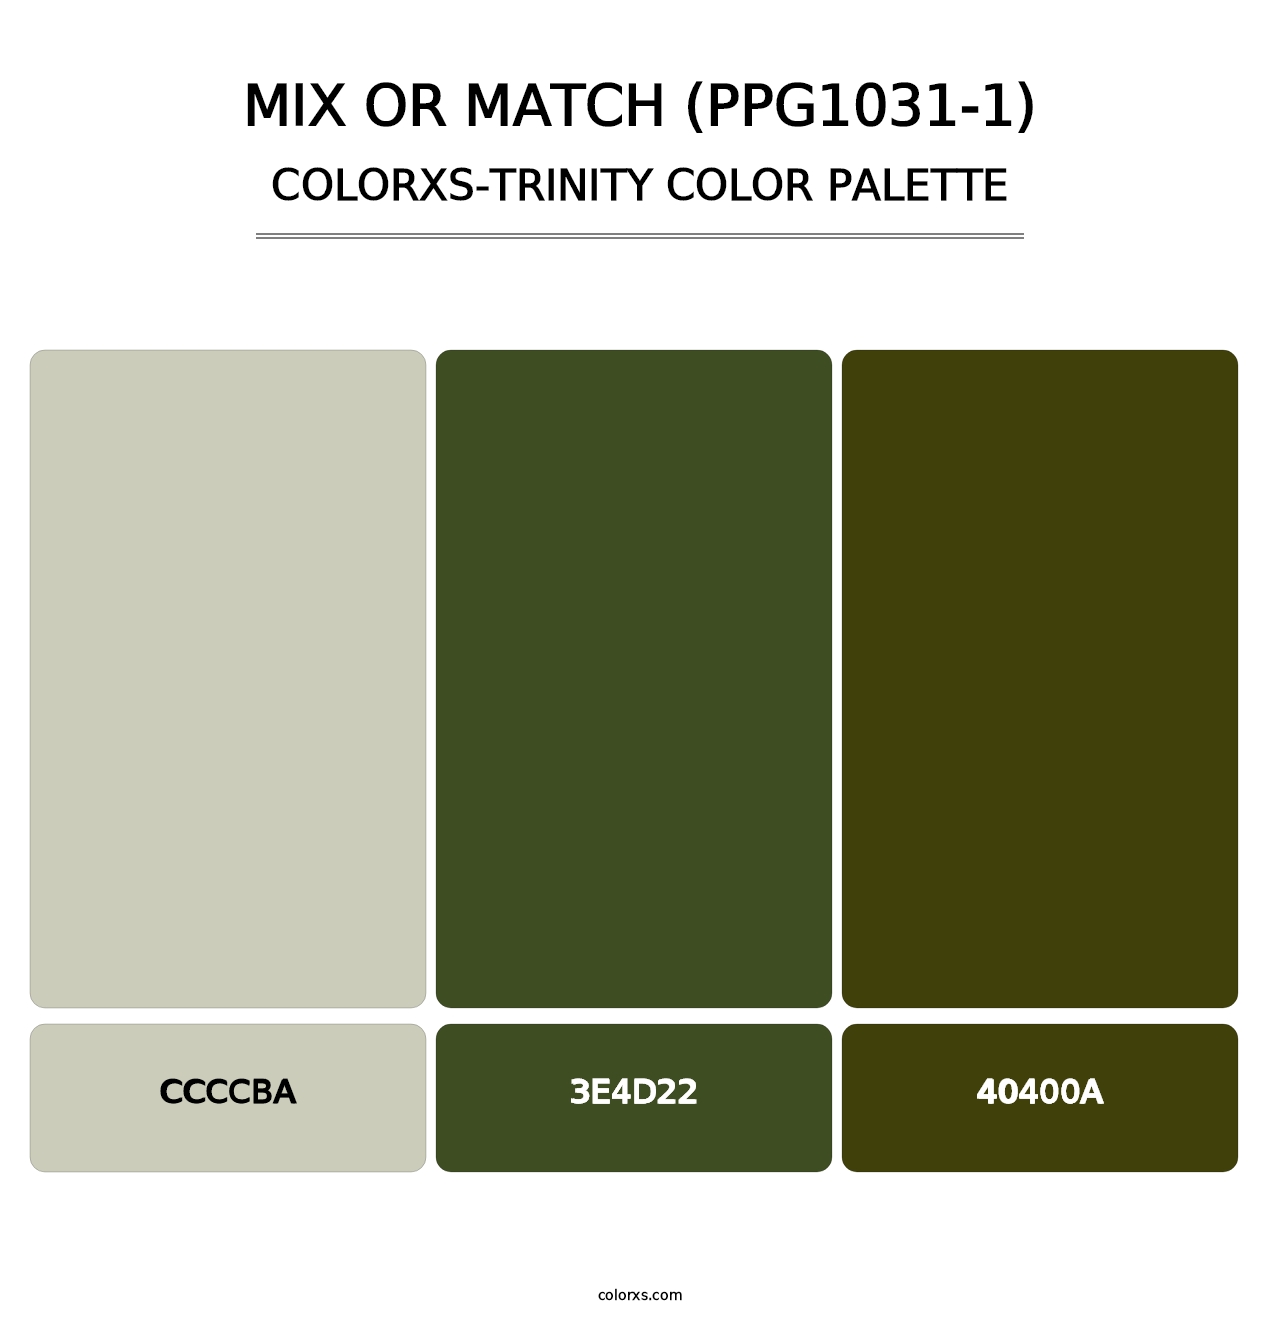 Mix Or Match (PPG1031-1) - Colorxs Trinity Palette